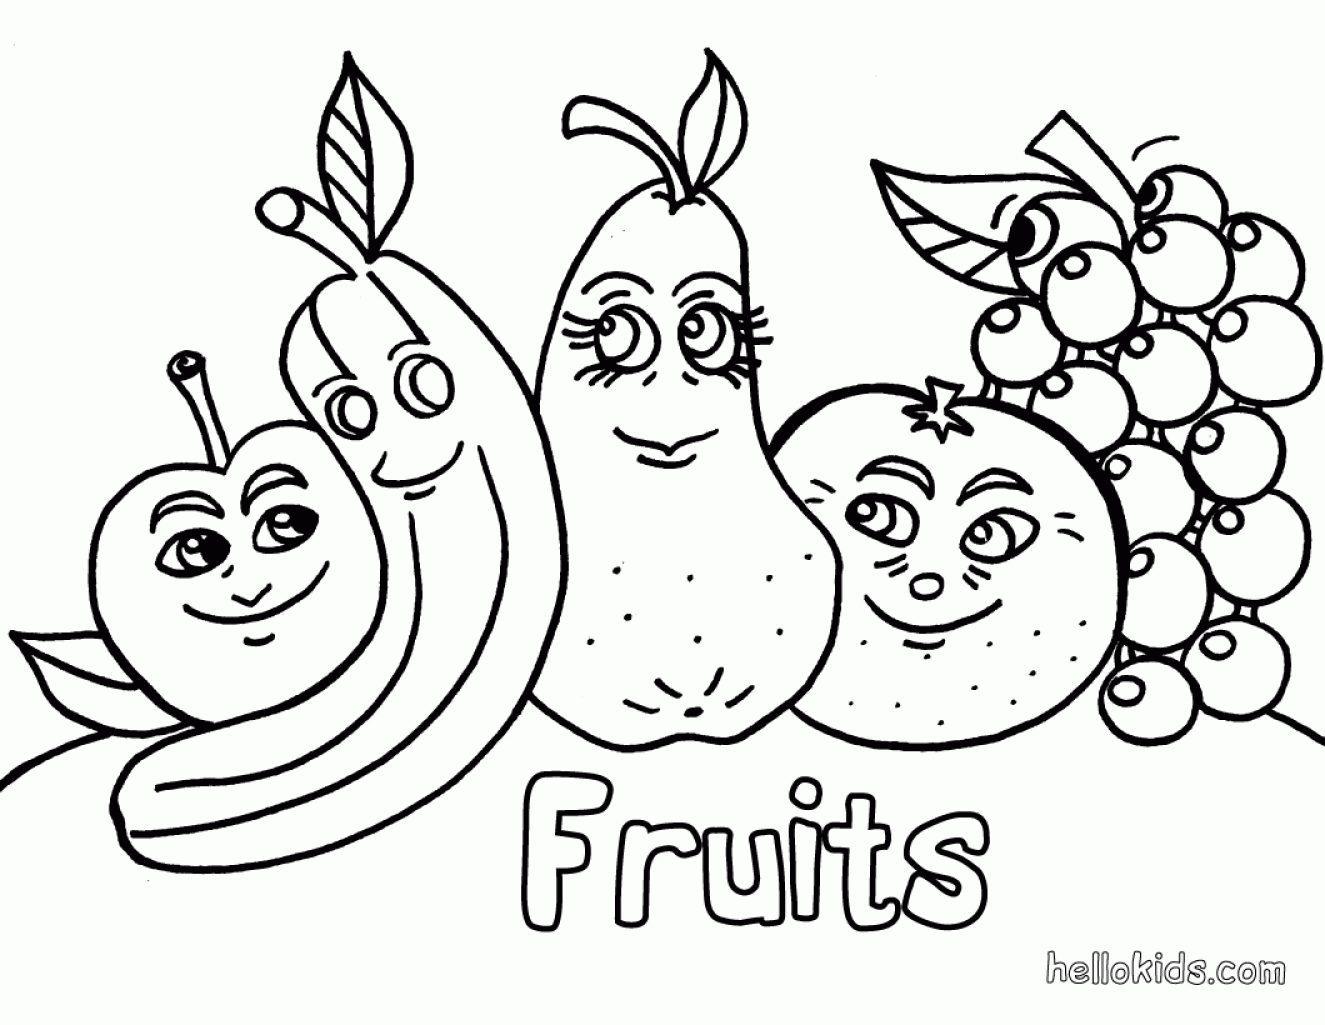 Free Colouring Pages Fruit Basket - Coloring